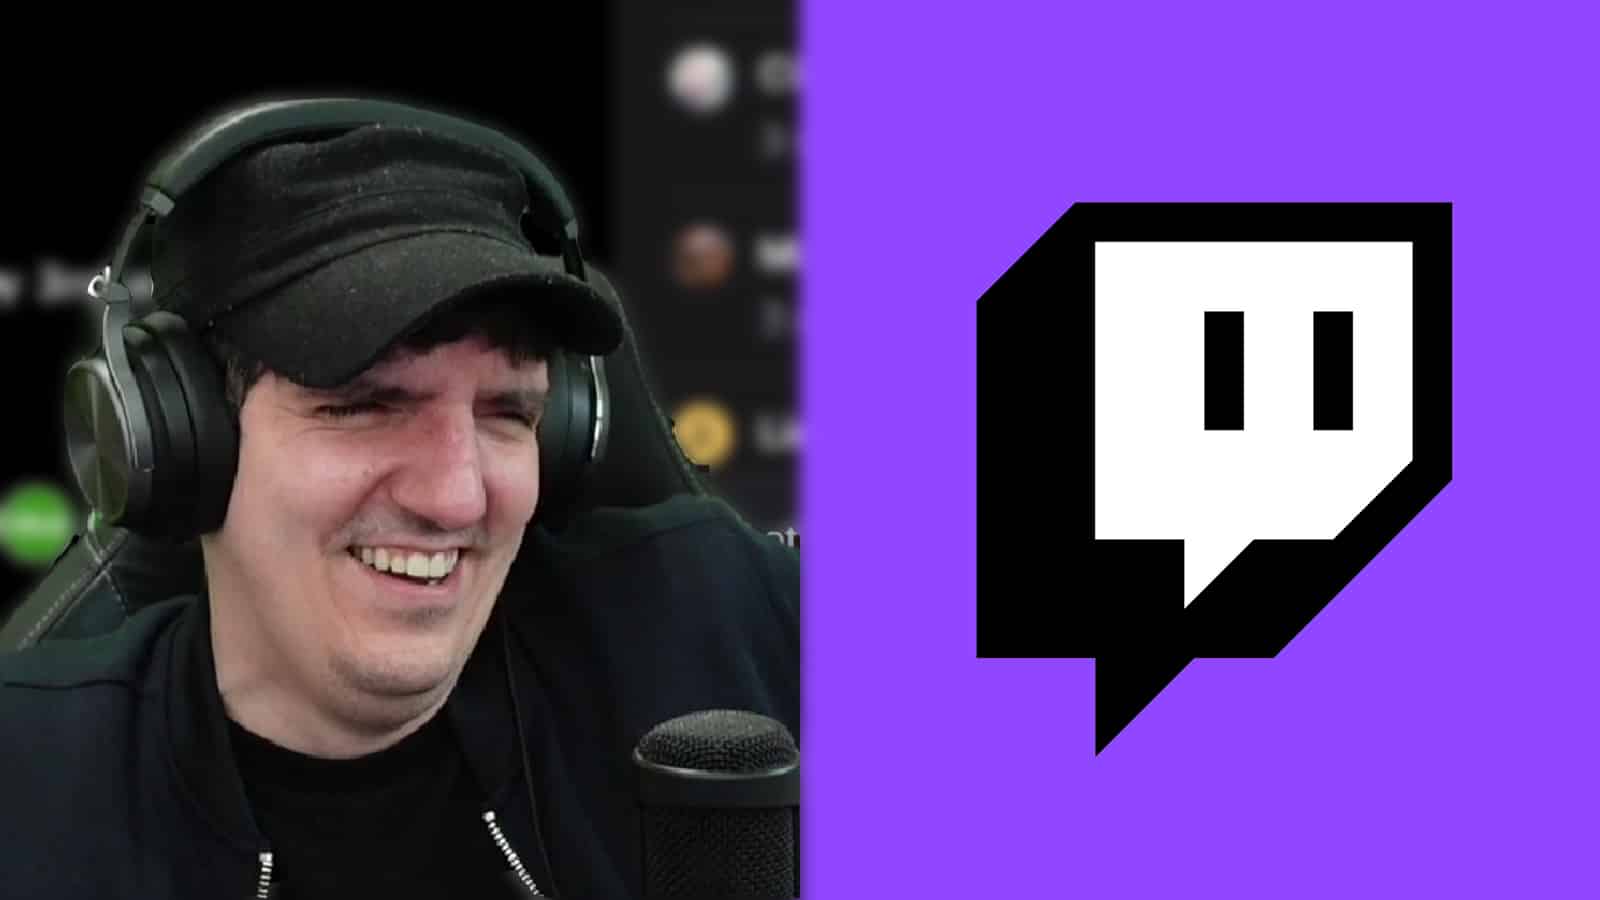 An image of streamer Artosis on Twitch.